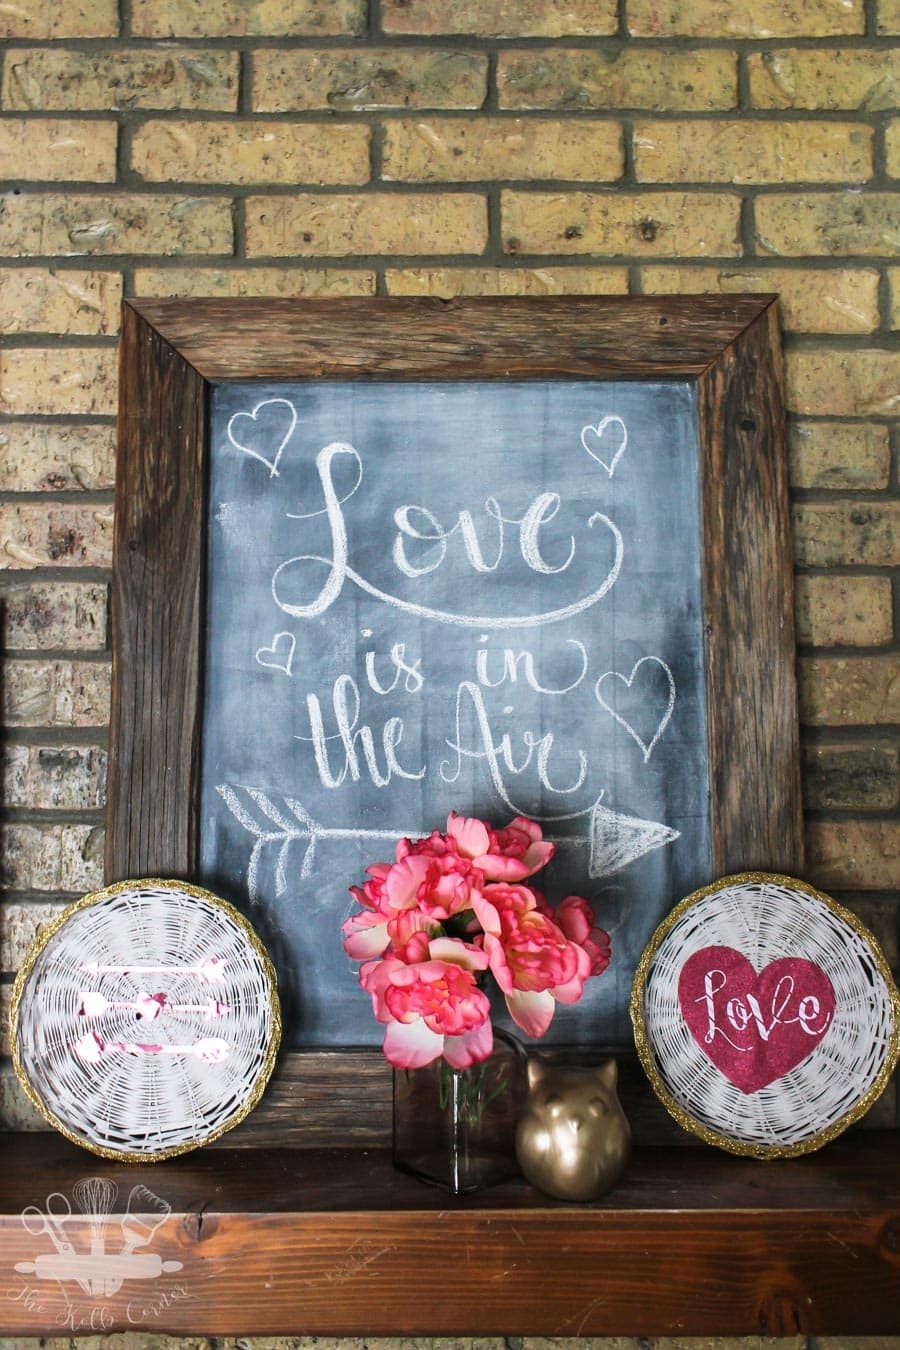 White painted wicker chargers with gold glitter edge, and pink glitter cardstock sitting on a wood fireplace mantel with brick background and chalkboard that says "Love is in the air"